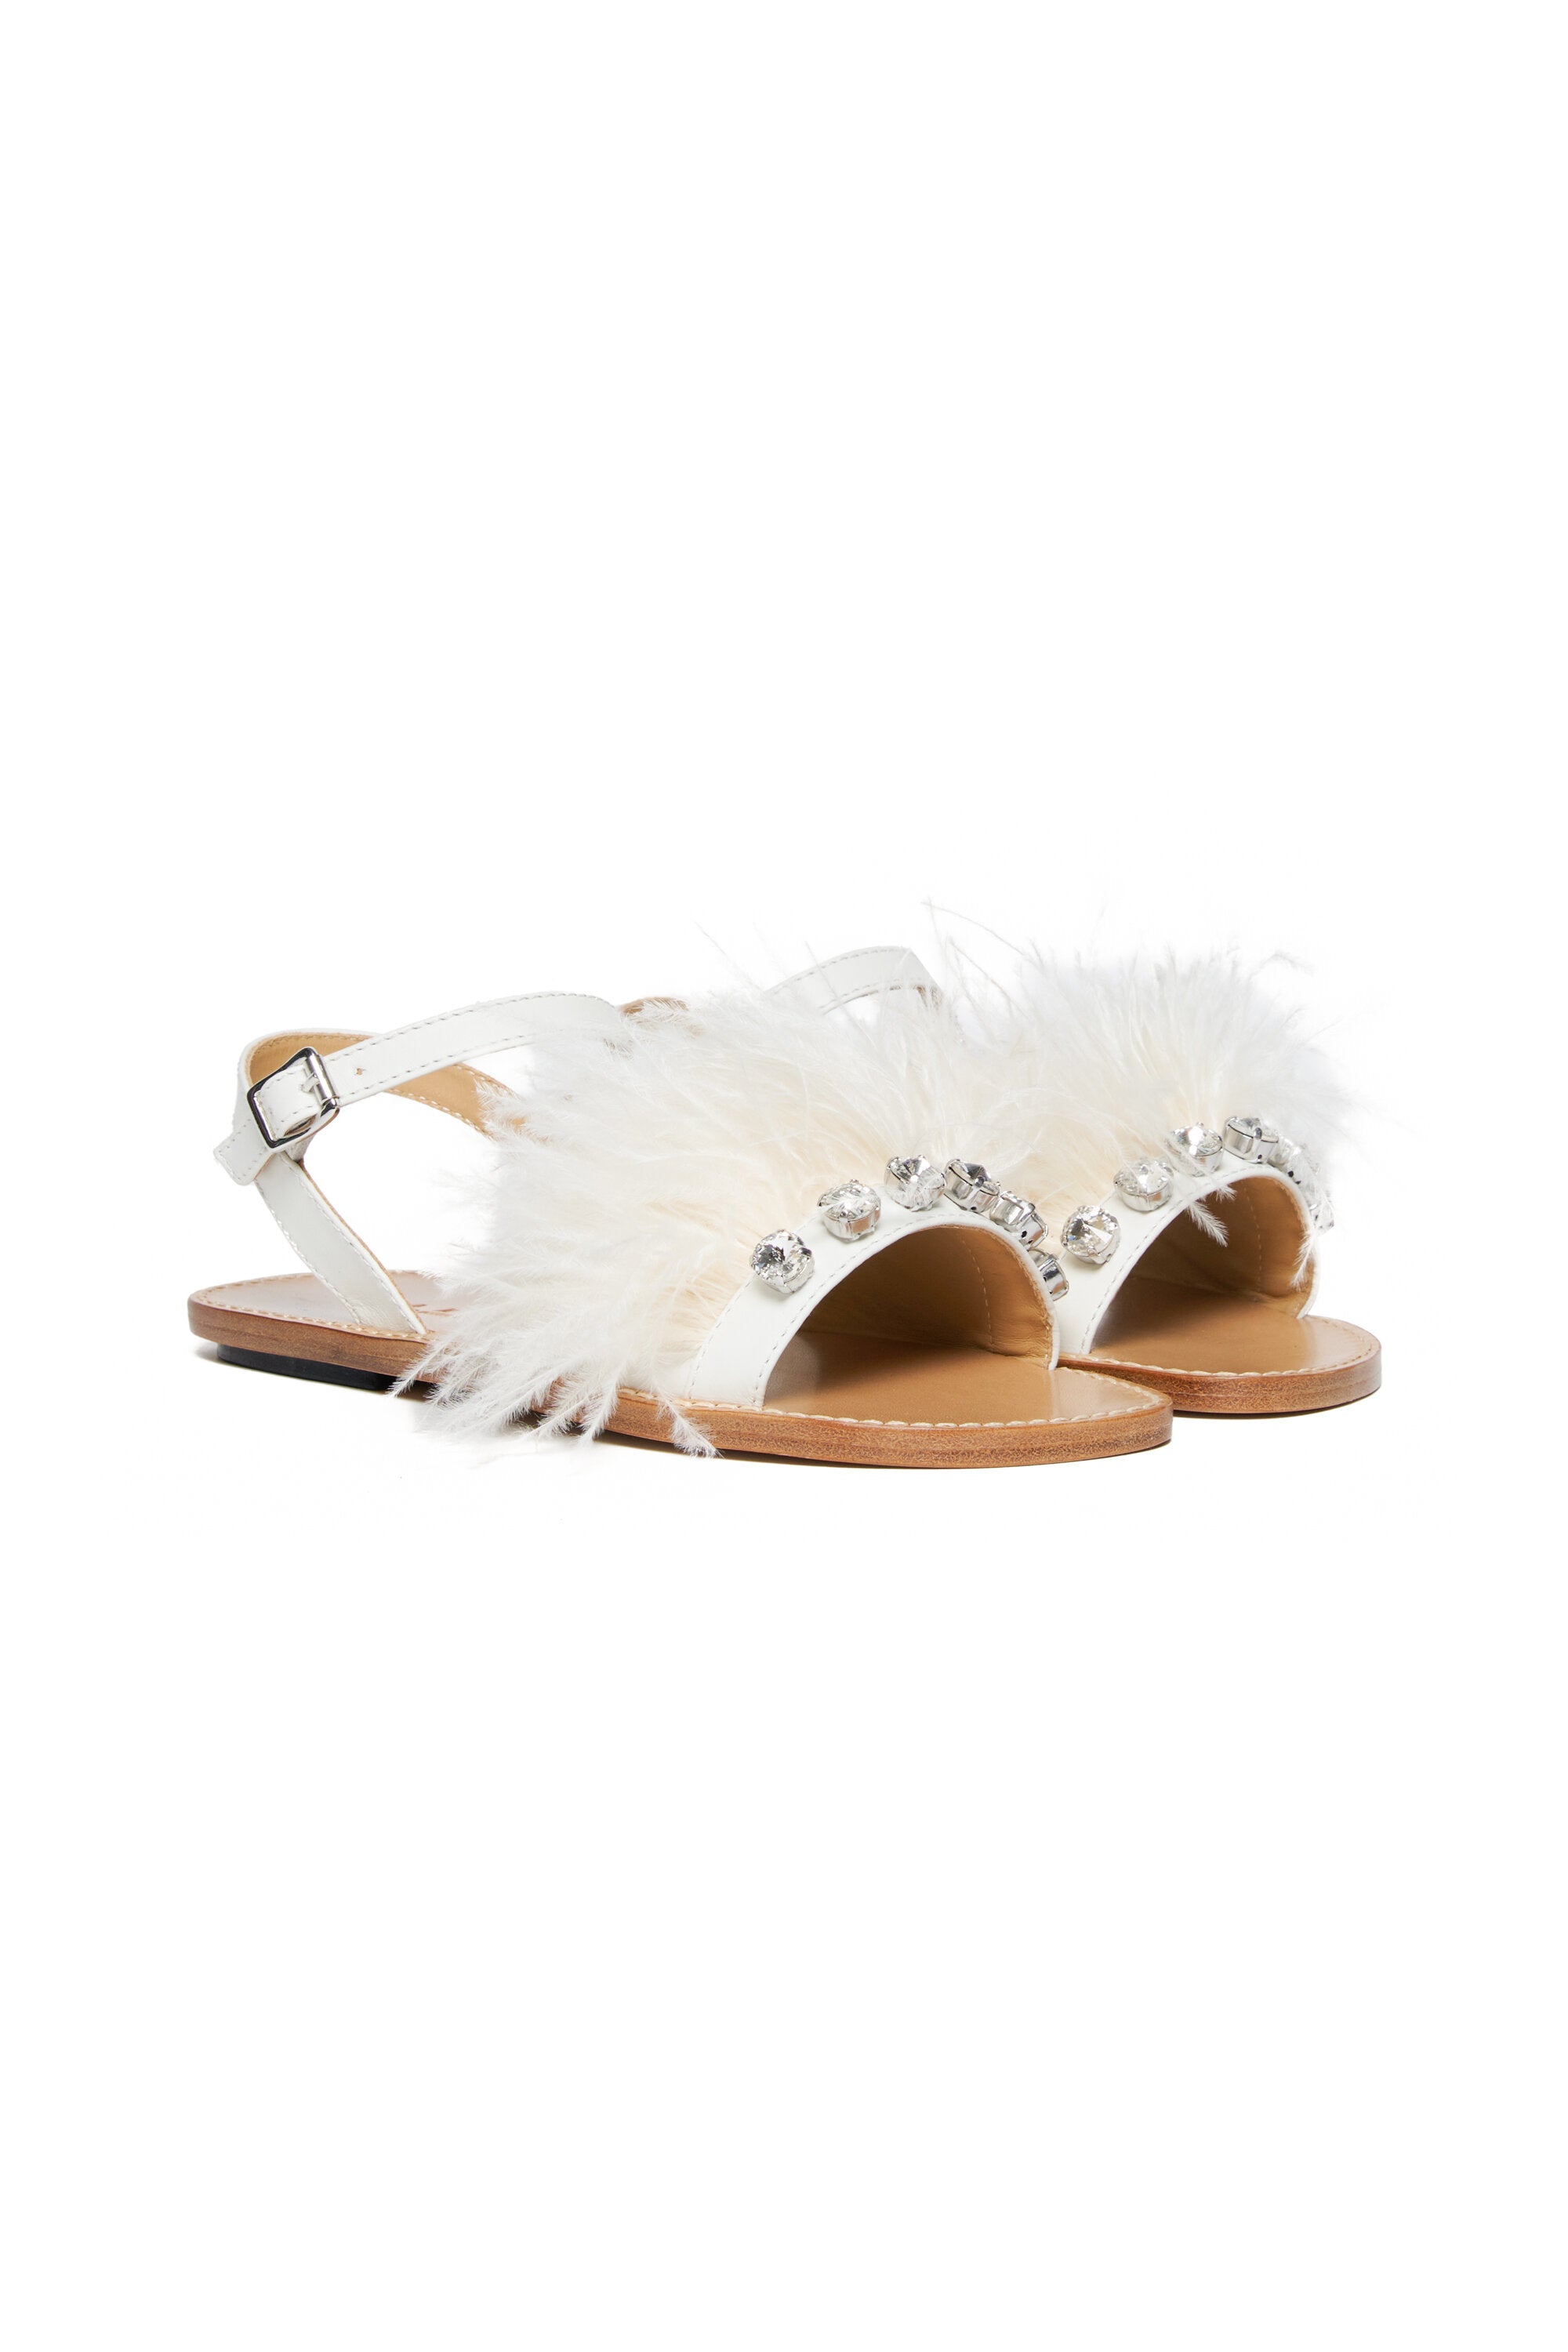 Sandals with feathers and rhinestones